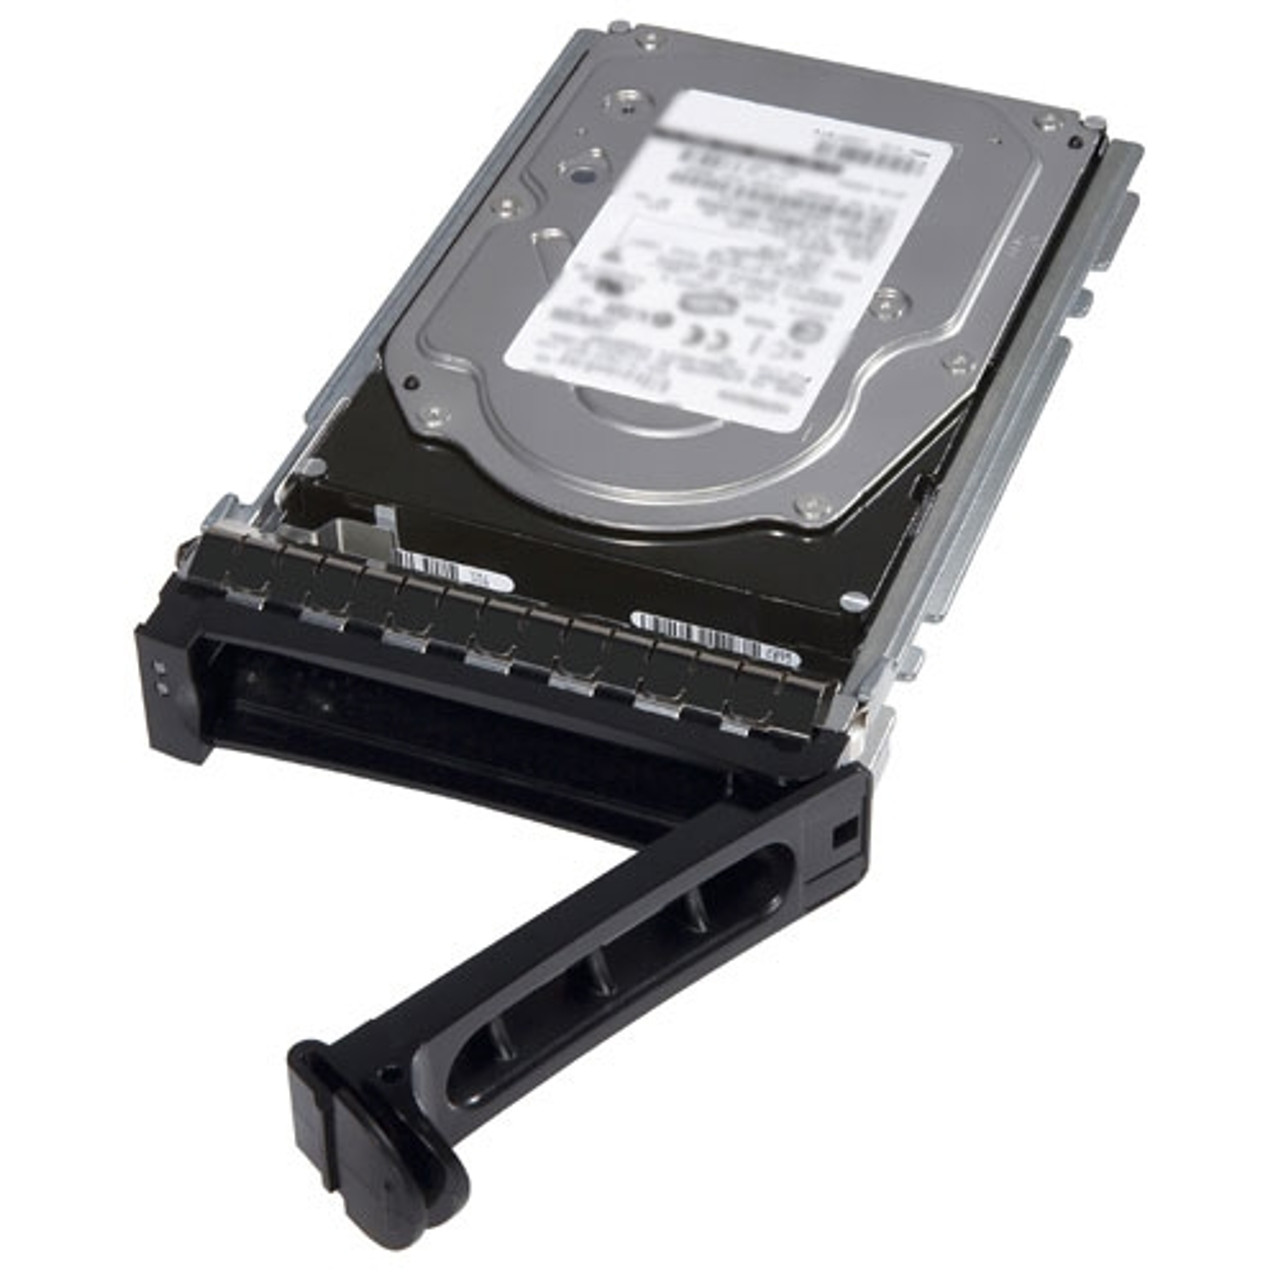 DELL DP279 1tb 7200rpm 32mb Buffer Sata-ii 3.5inch Low Profile (1.0inch) Hard Disk Drive With Tray For Poweredge Server